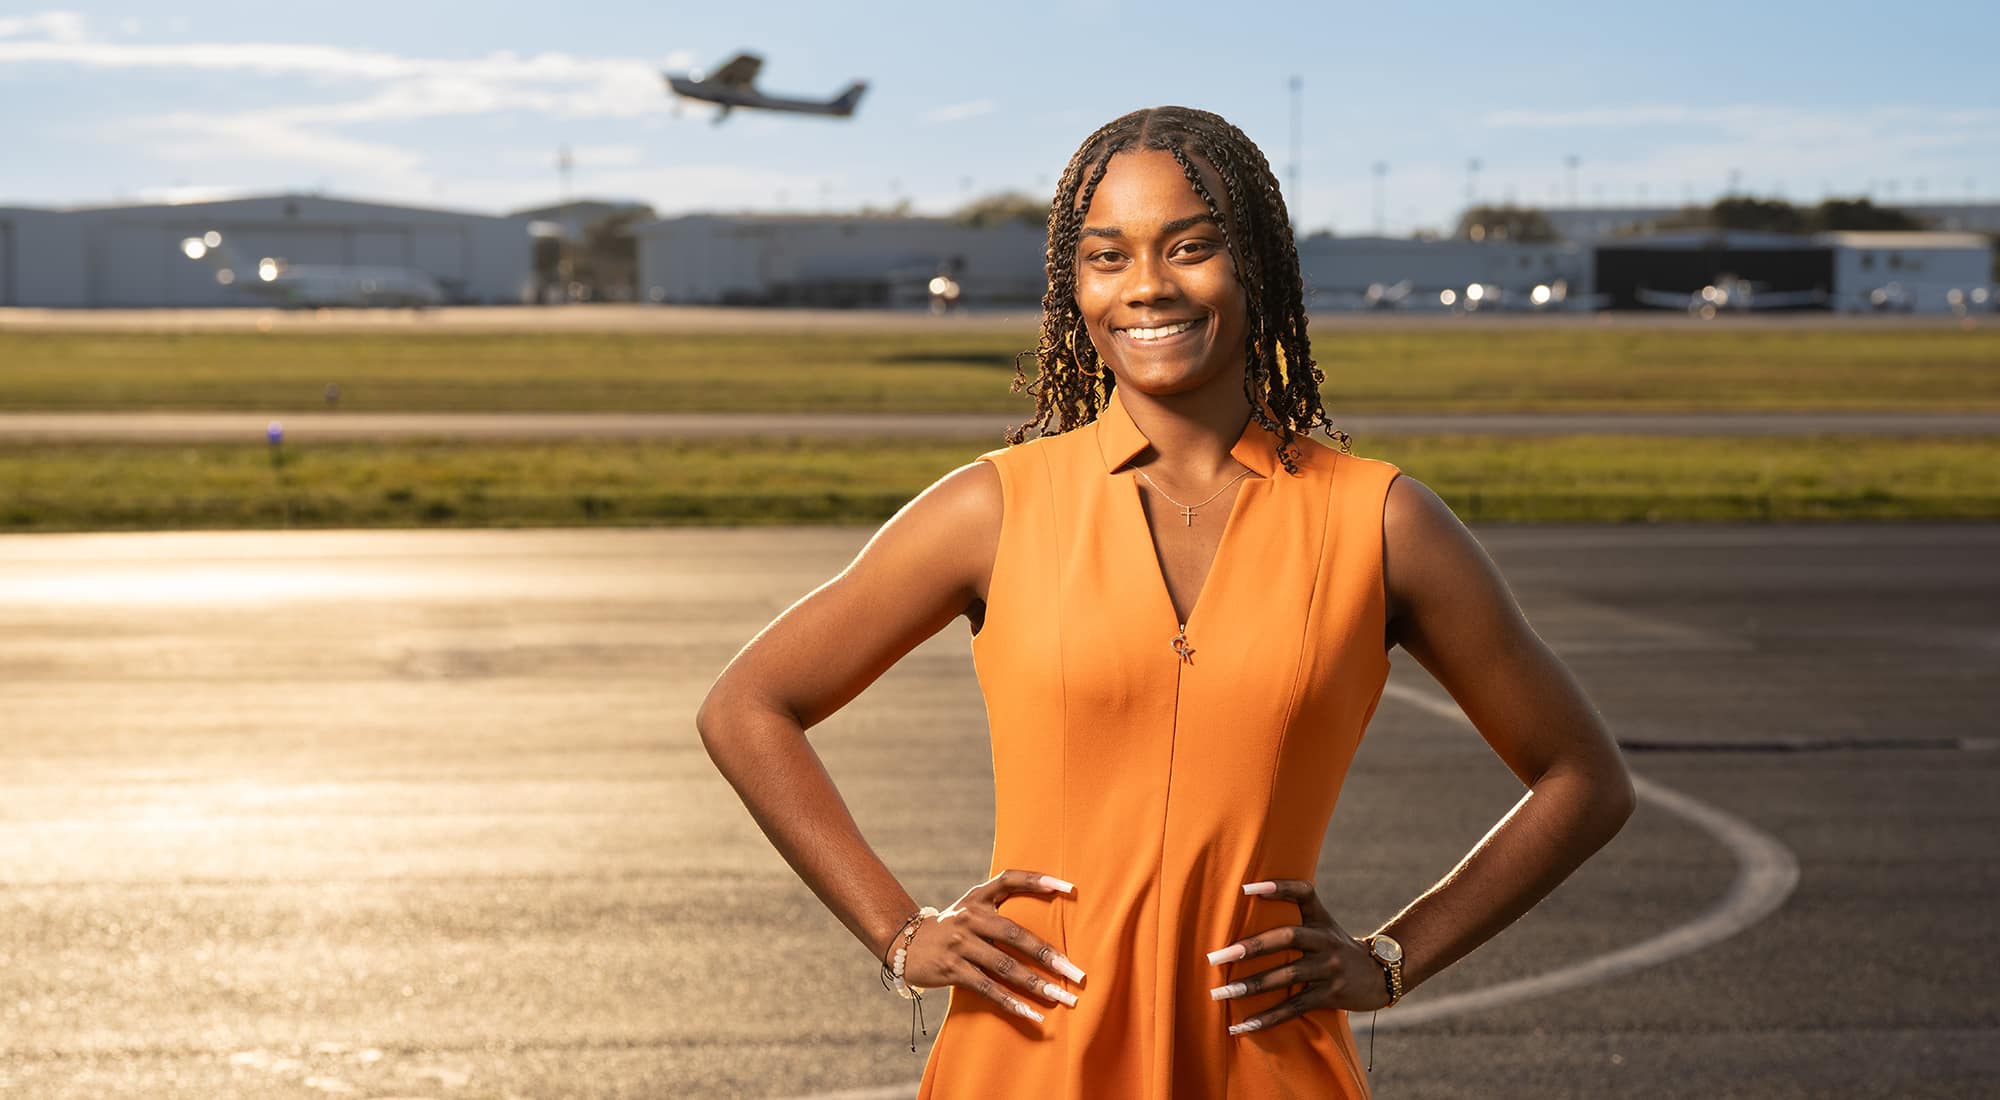 Coral, a Black woman with long braided hair, poses in an orange dress, a small plane taking off in the distance.